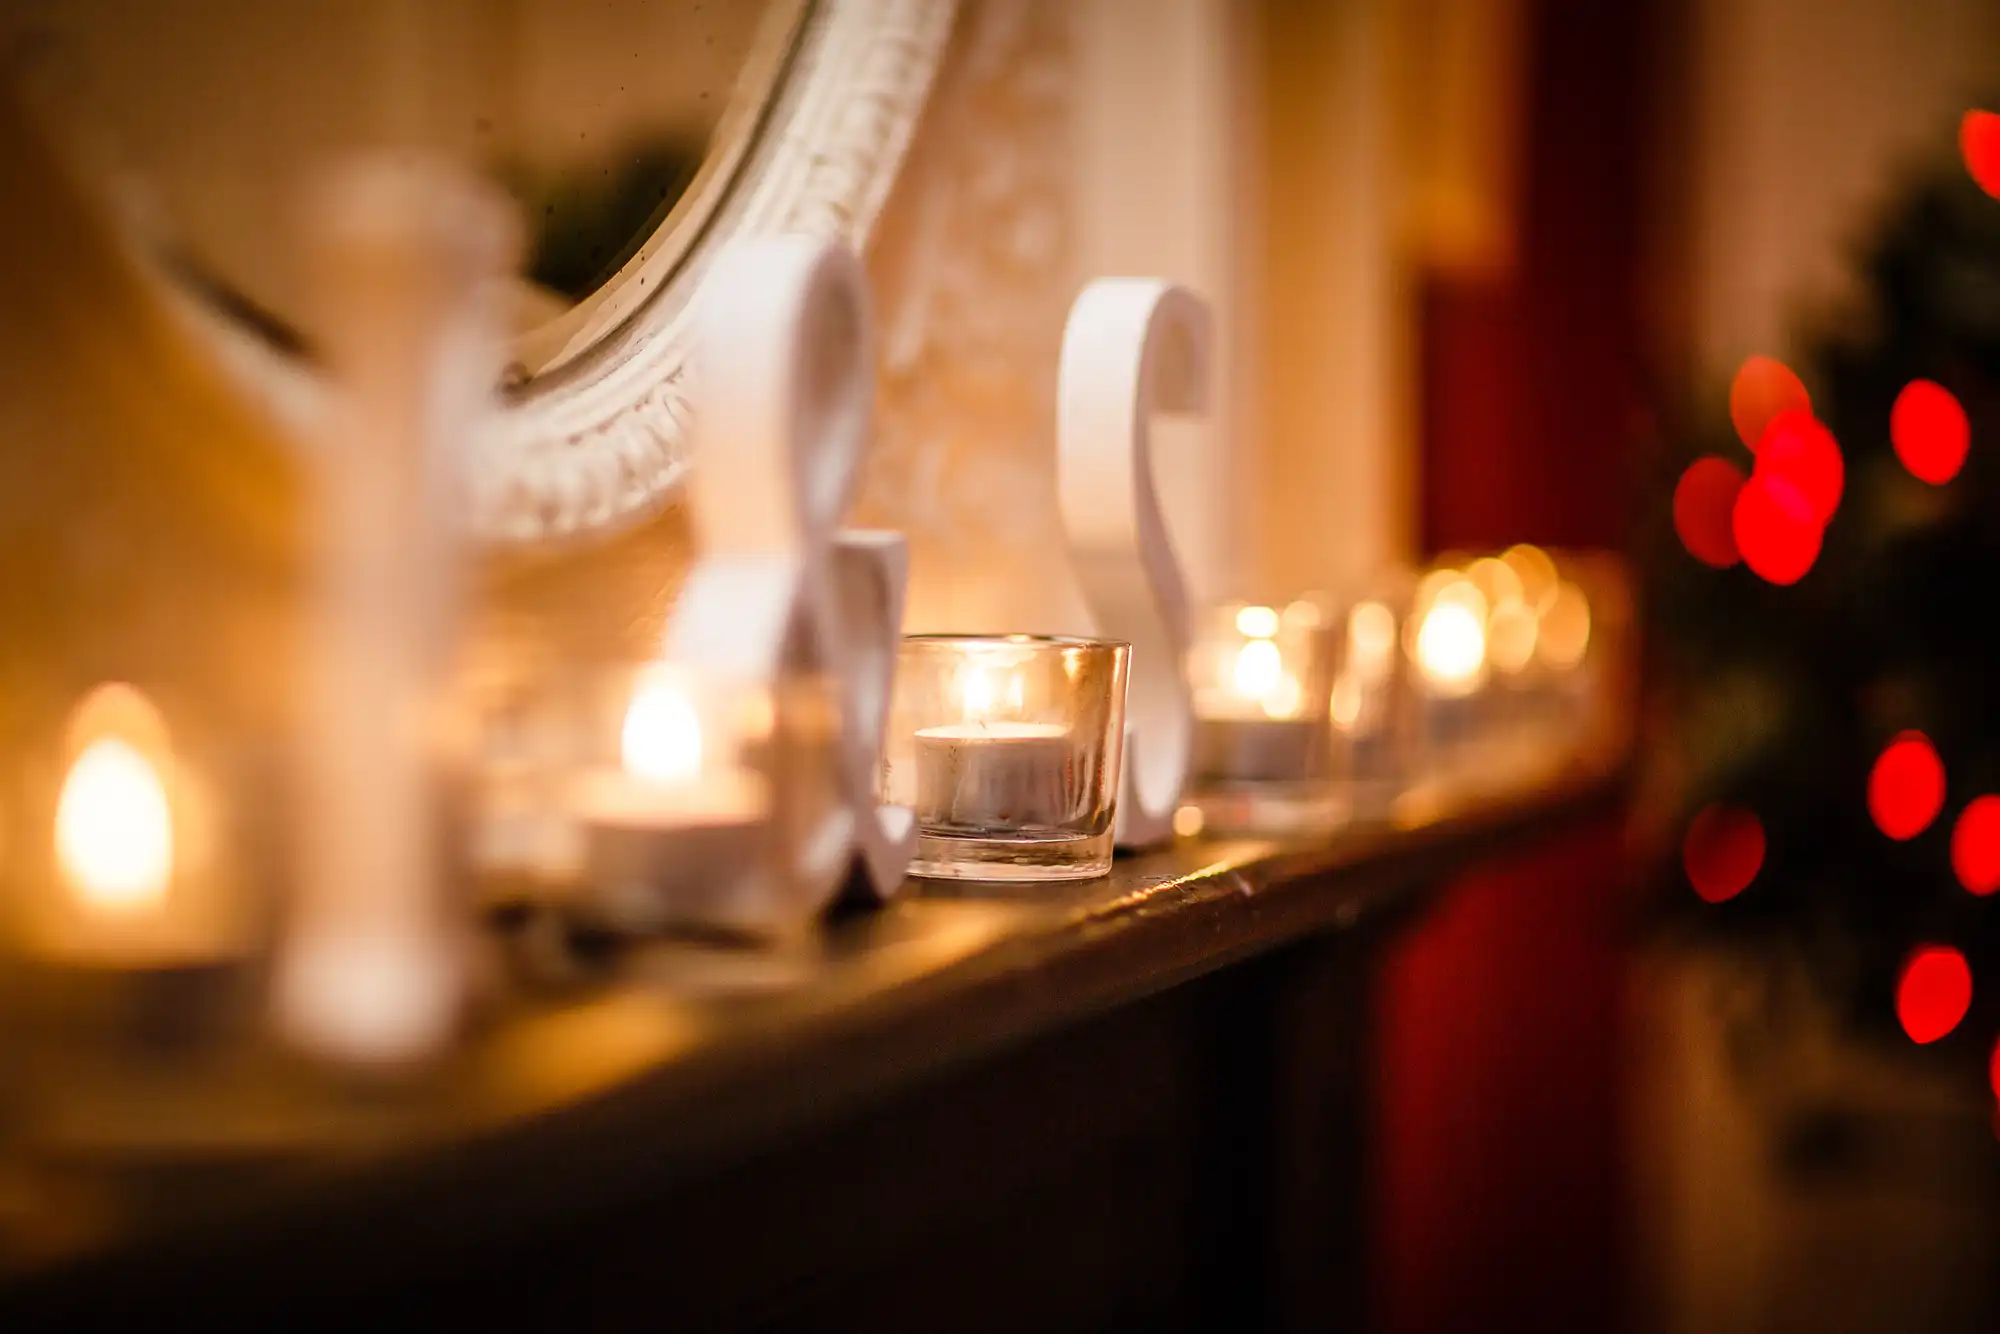 Lit candles in small glass holders on a mantel, with a mirror and soft glow, creating a warm, festive atmosphere.